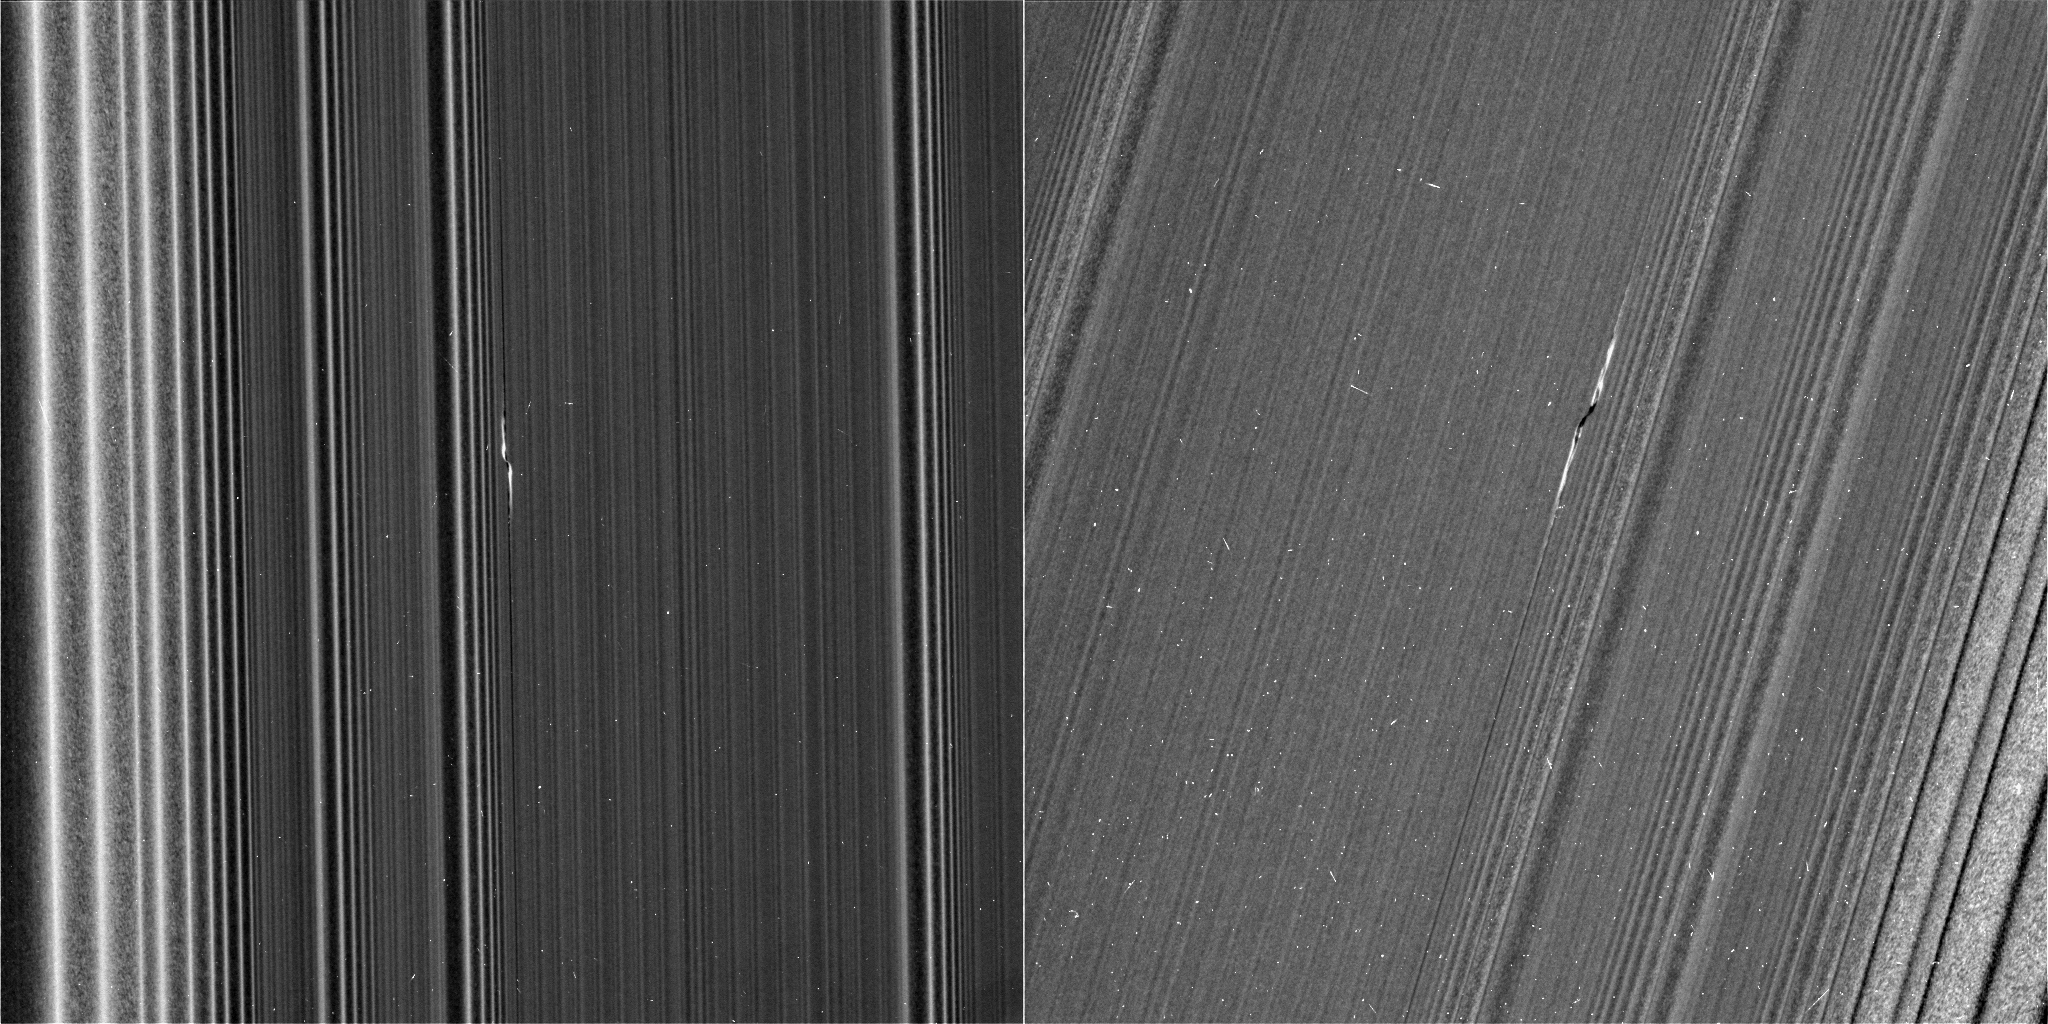 Propeller in Saturn's A Ring (Fig. B)